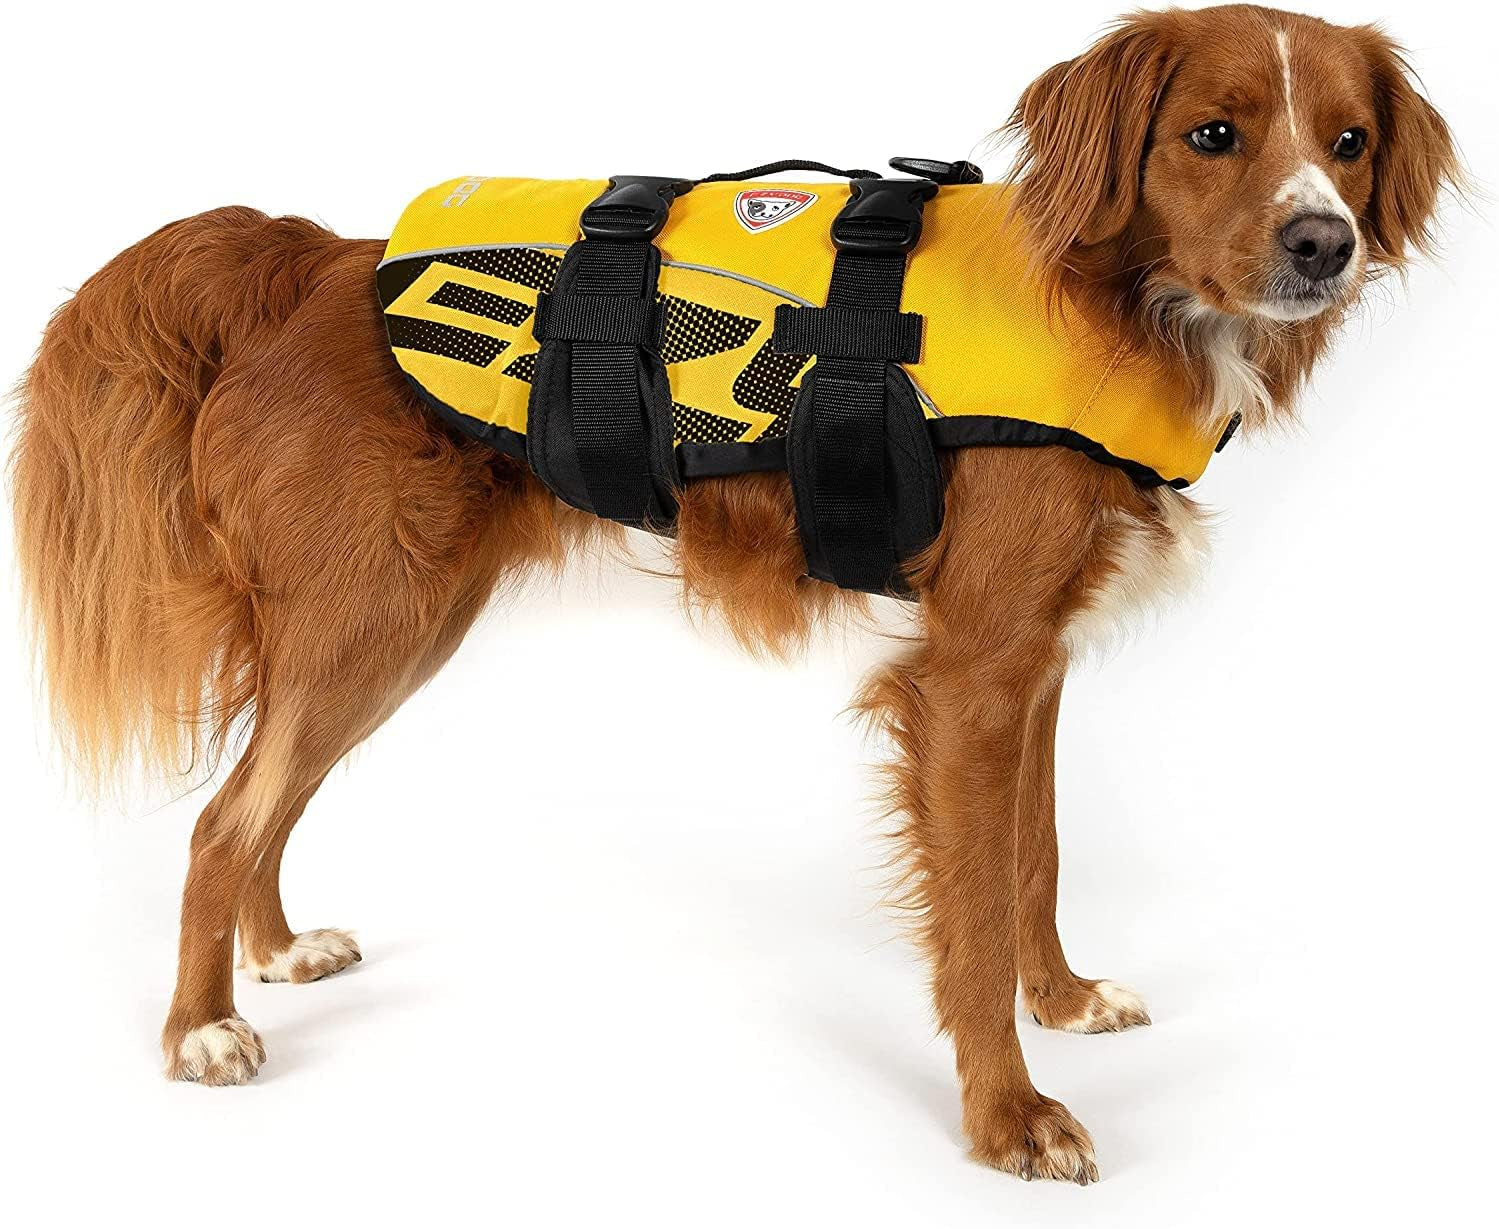 Ezydog Premium Doggy Flotation Device (DFD) - Adjustable Dog Life Jacket Preserver with Reflective Trim - Durable Grab Handle for Safety and Protection - 50% More Flotation Material (Medium, Yellow)